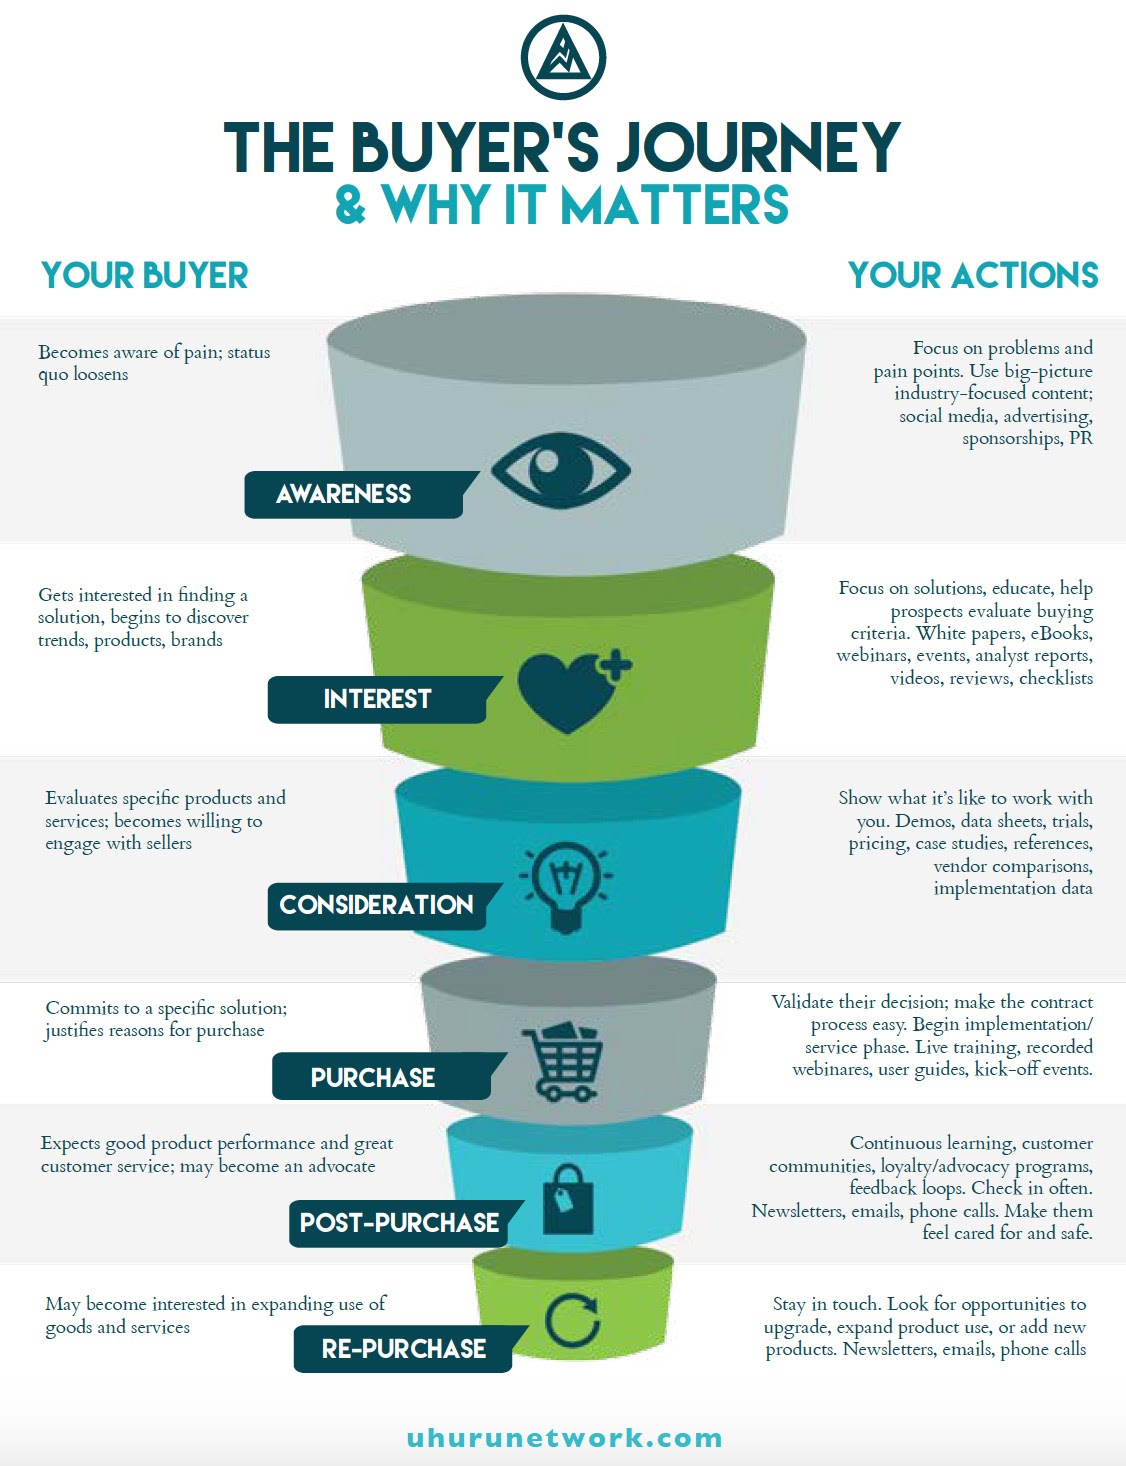 The Buyers Journey and Why It Matters digital marketing